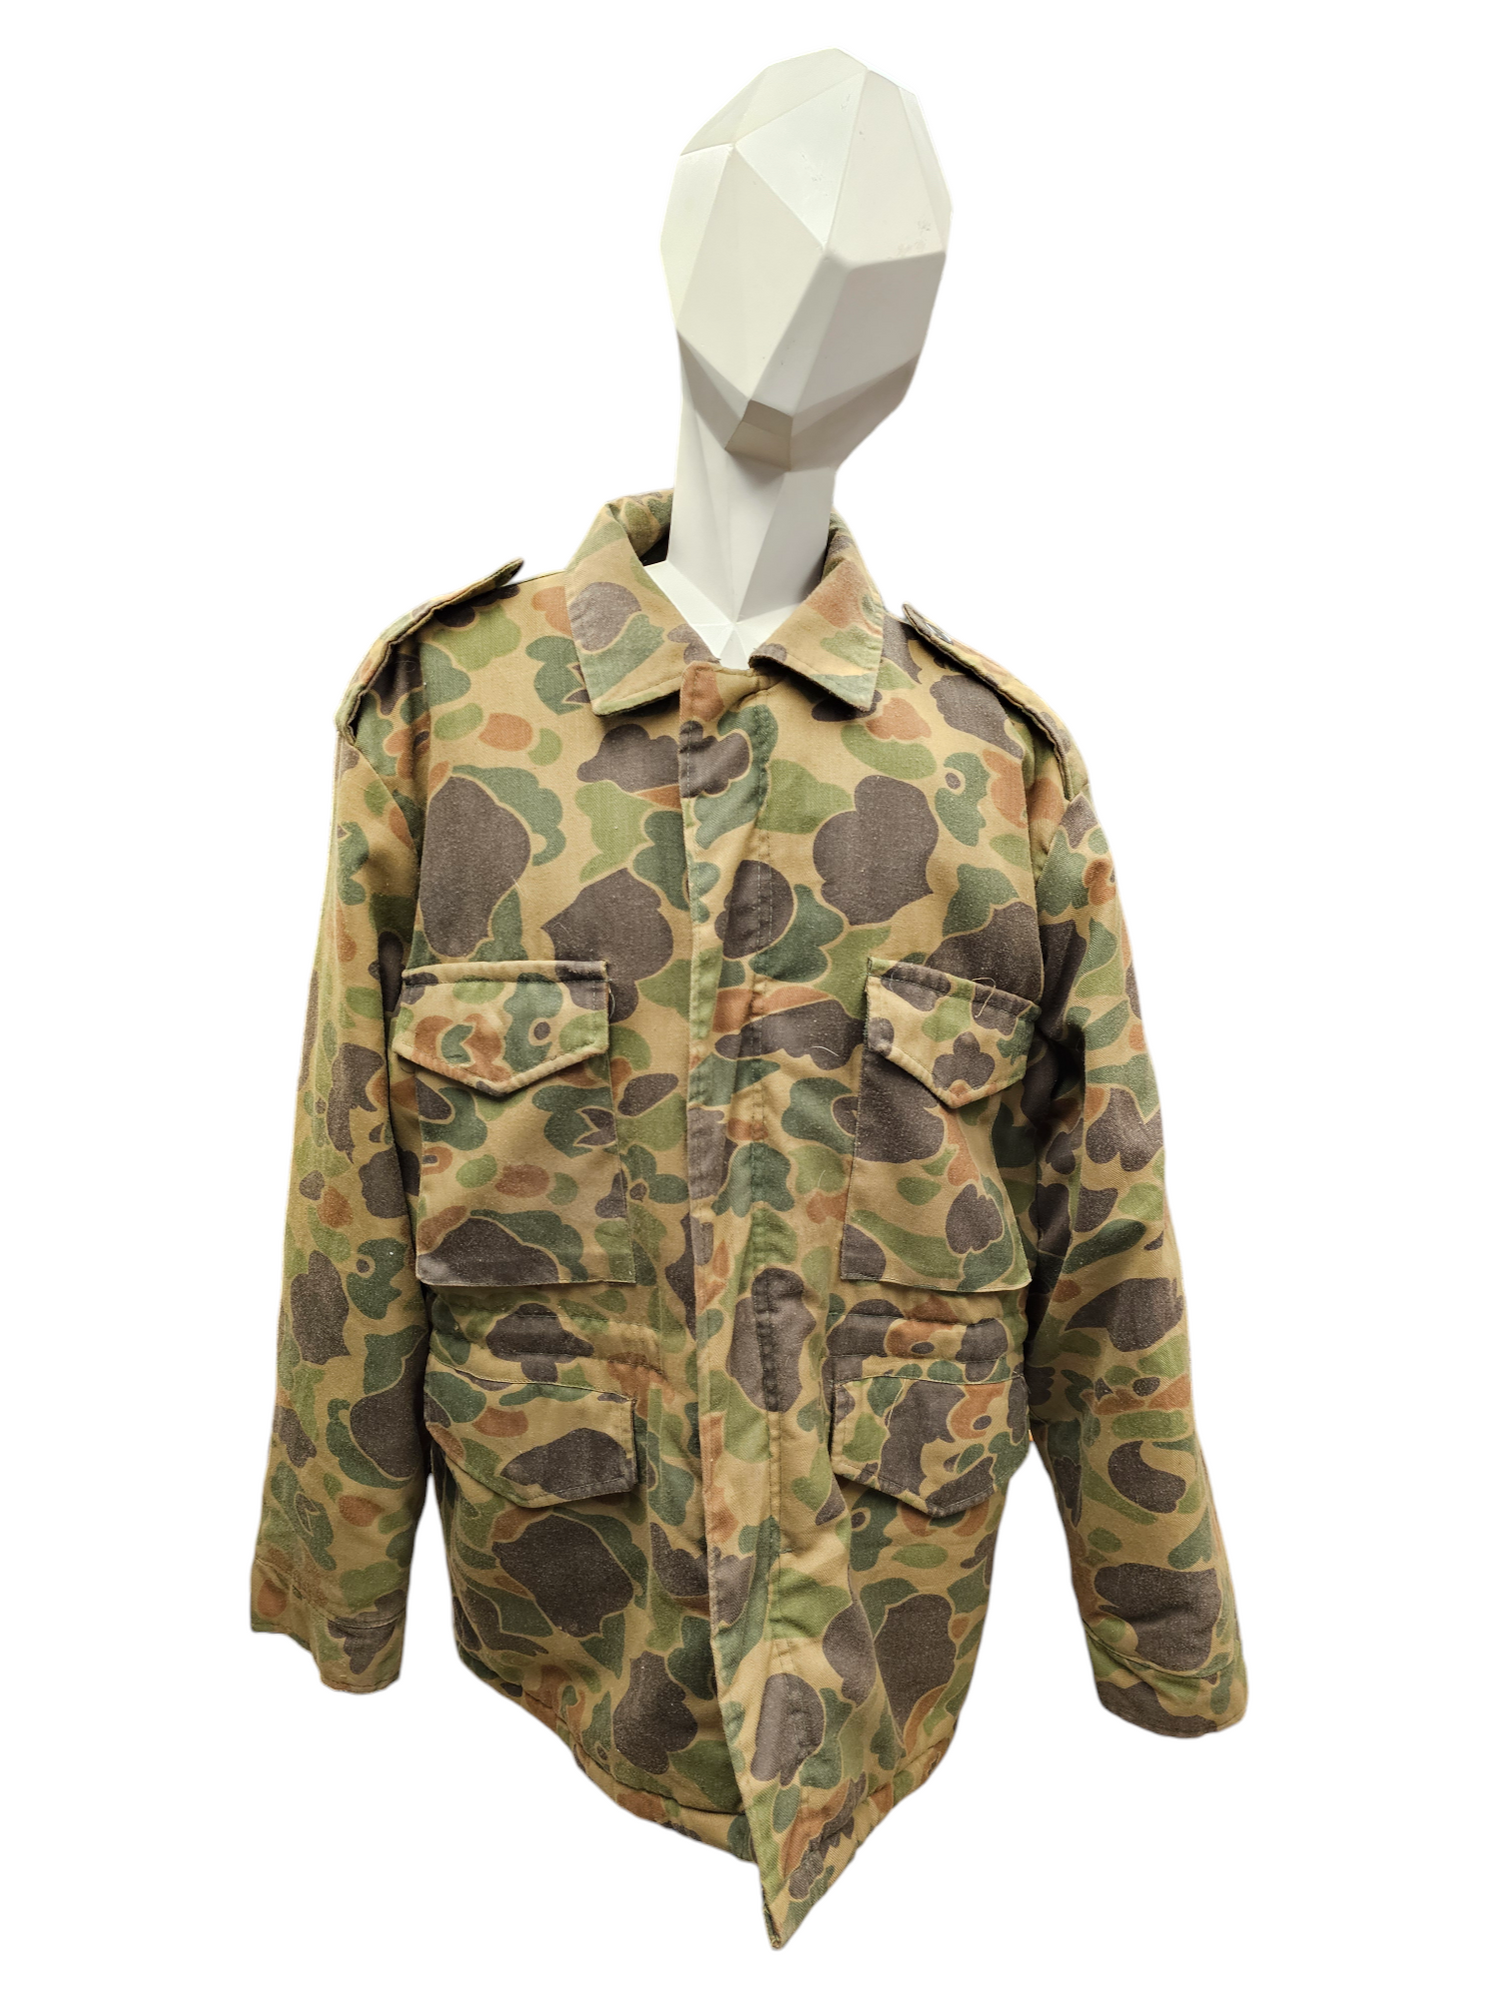 Vintage M-52 Style Duck Camo Hunting Jacket